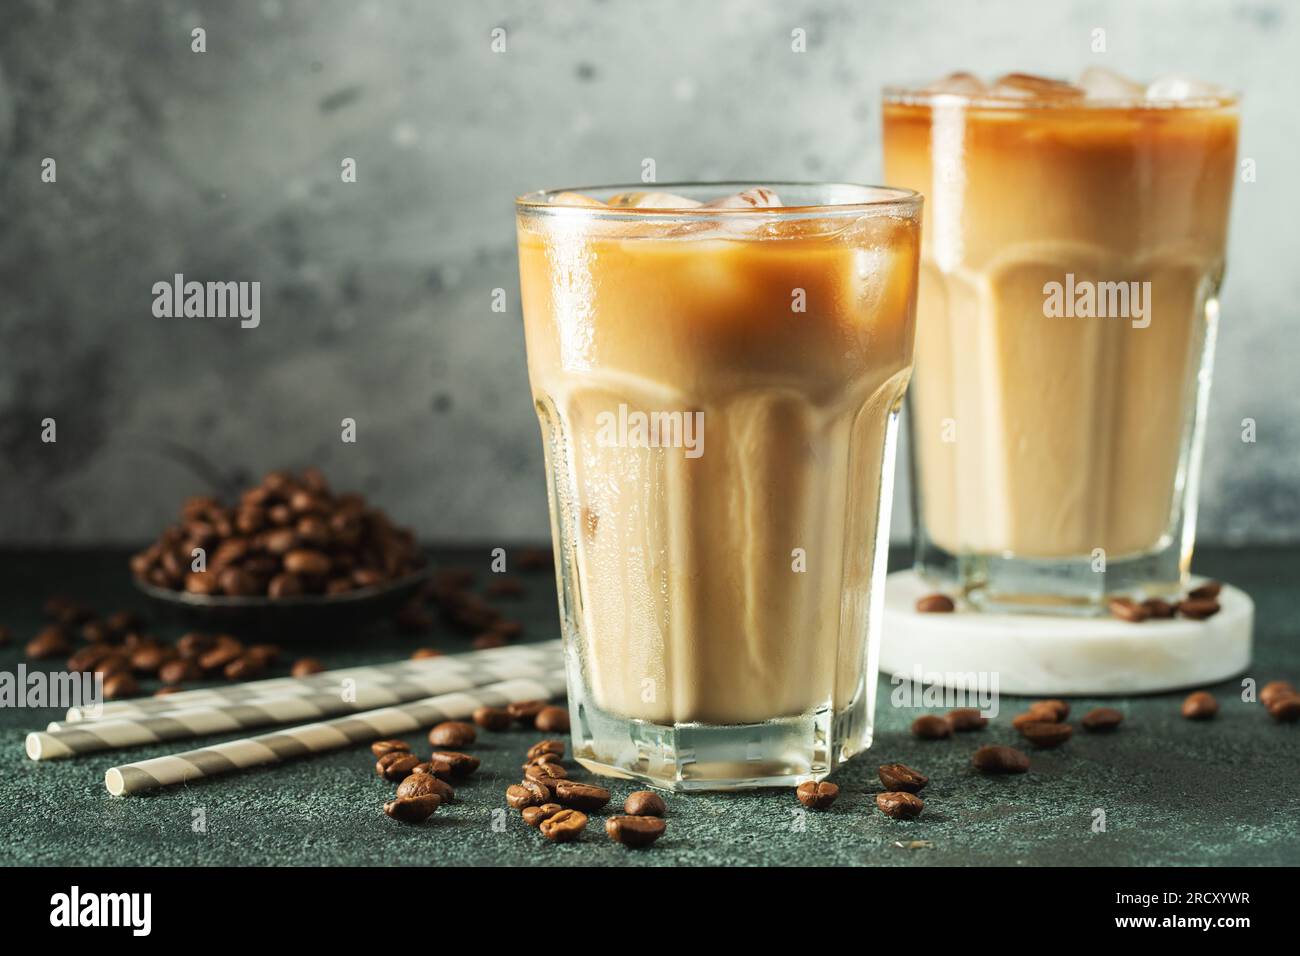 https://c8.alamy.com/comp/2RCXYWR/ice-coffee-in-a-tall-glass-with-cream-poured-over-ice-cubes-and-beans-on-a-dark-concrete-table-2RCXYWR.jpg